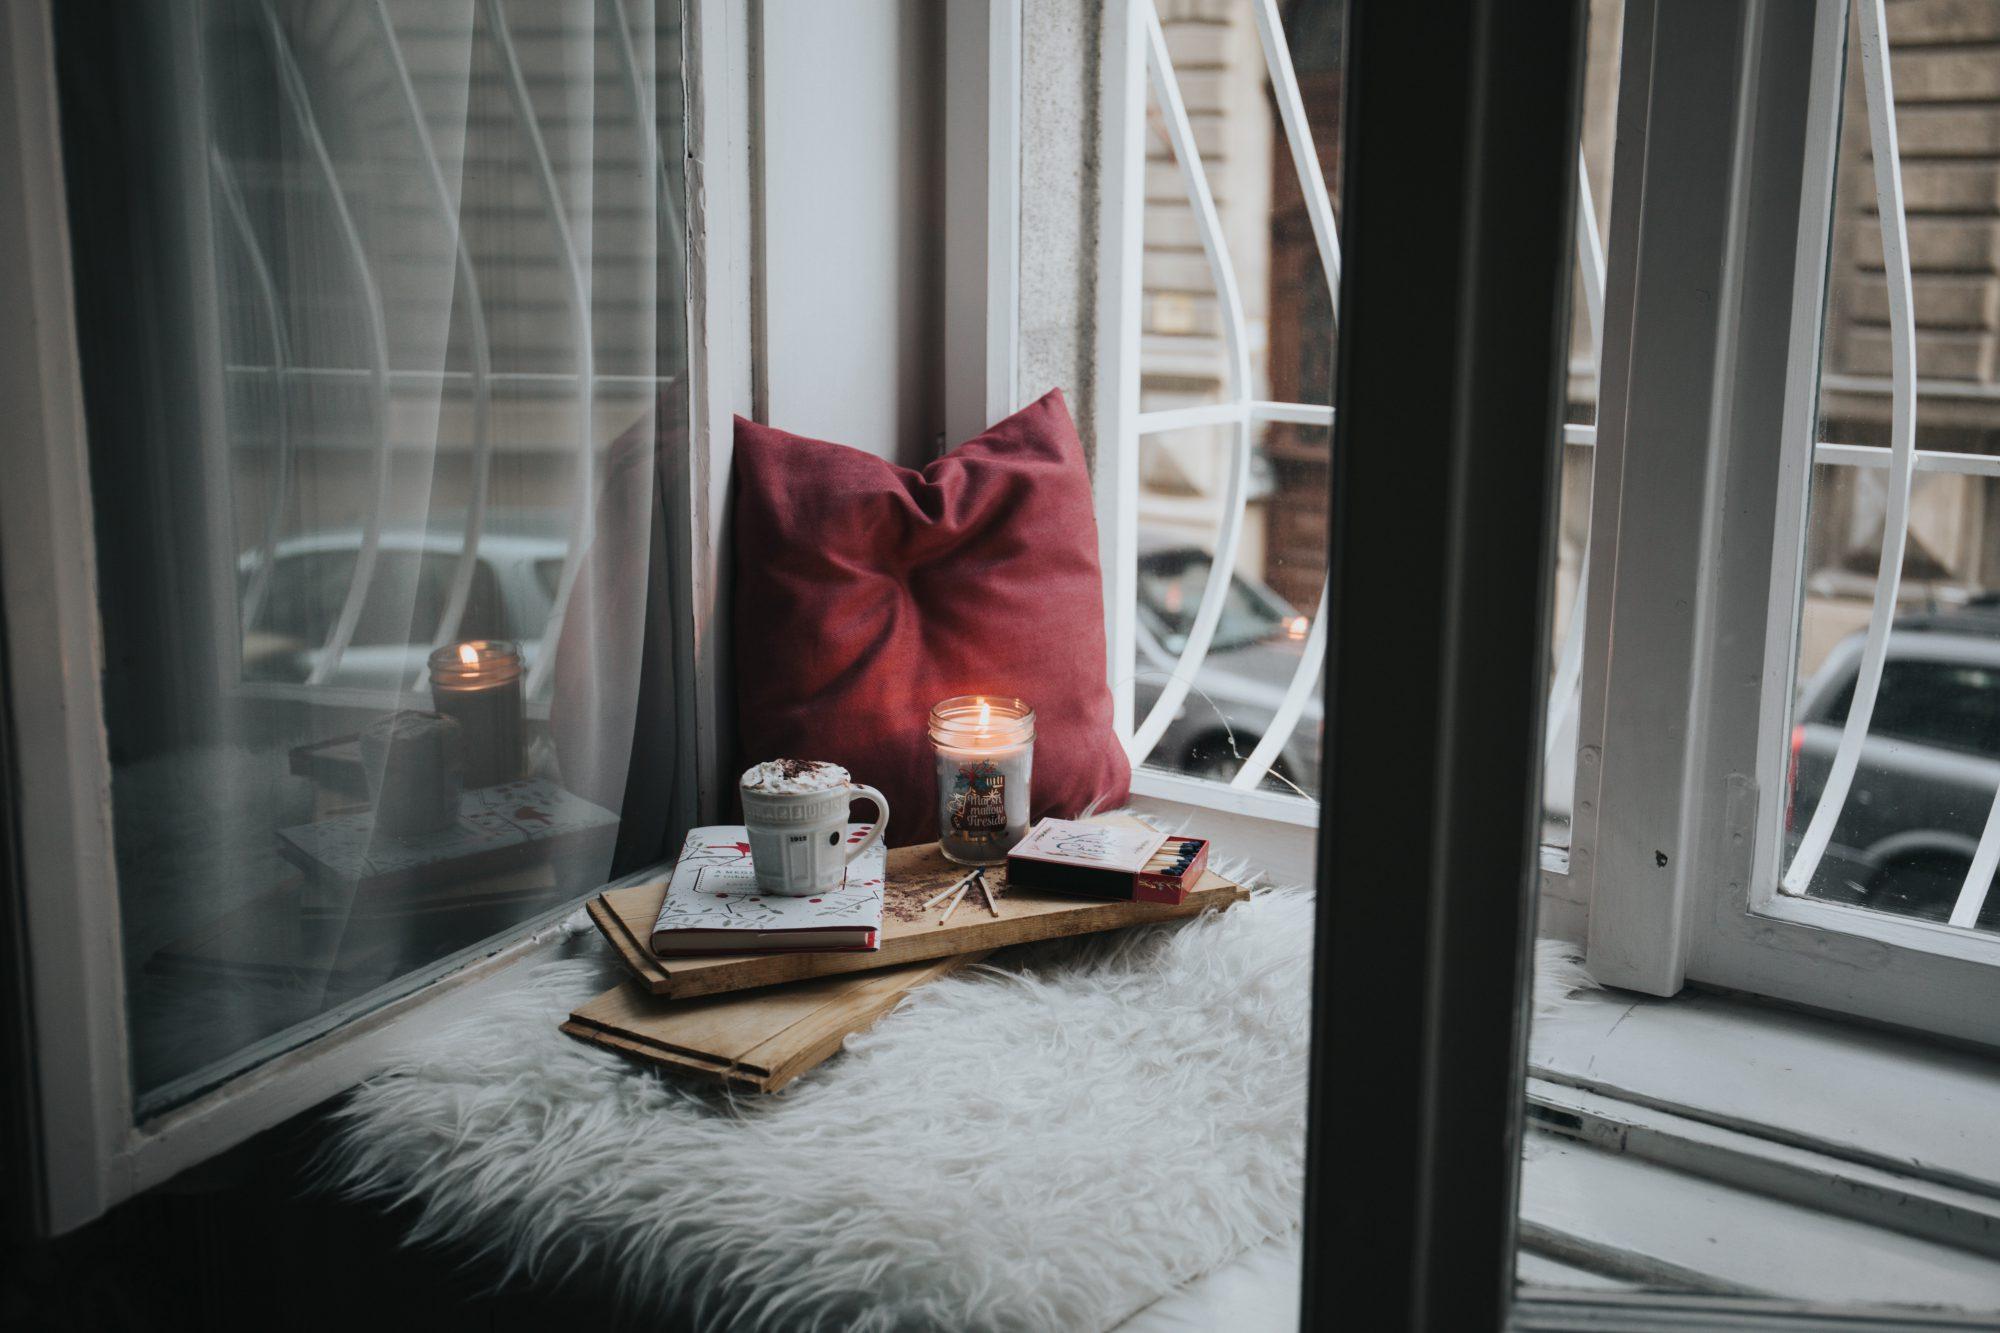 A comfy spot next to window sill with pillow, candle, a pad of paper and a mug.